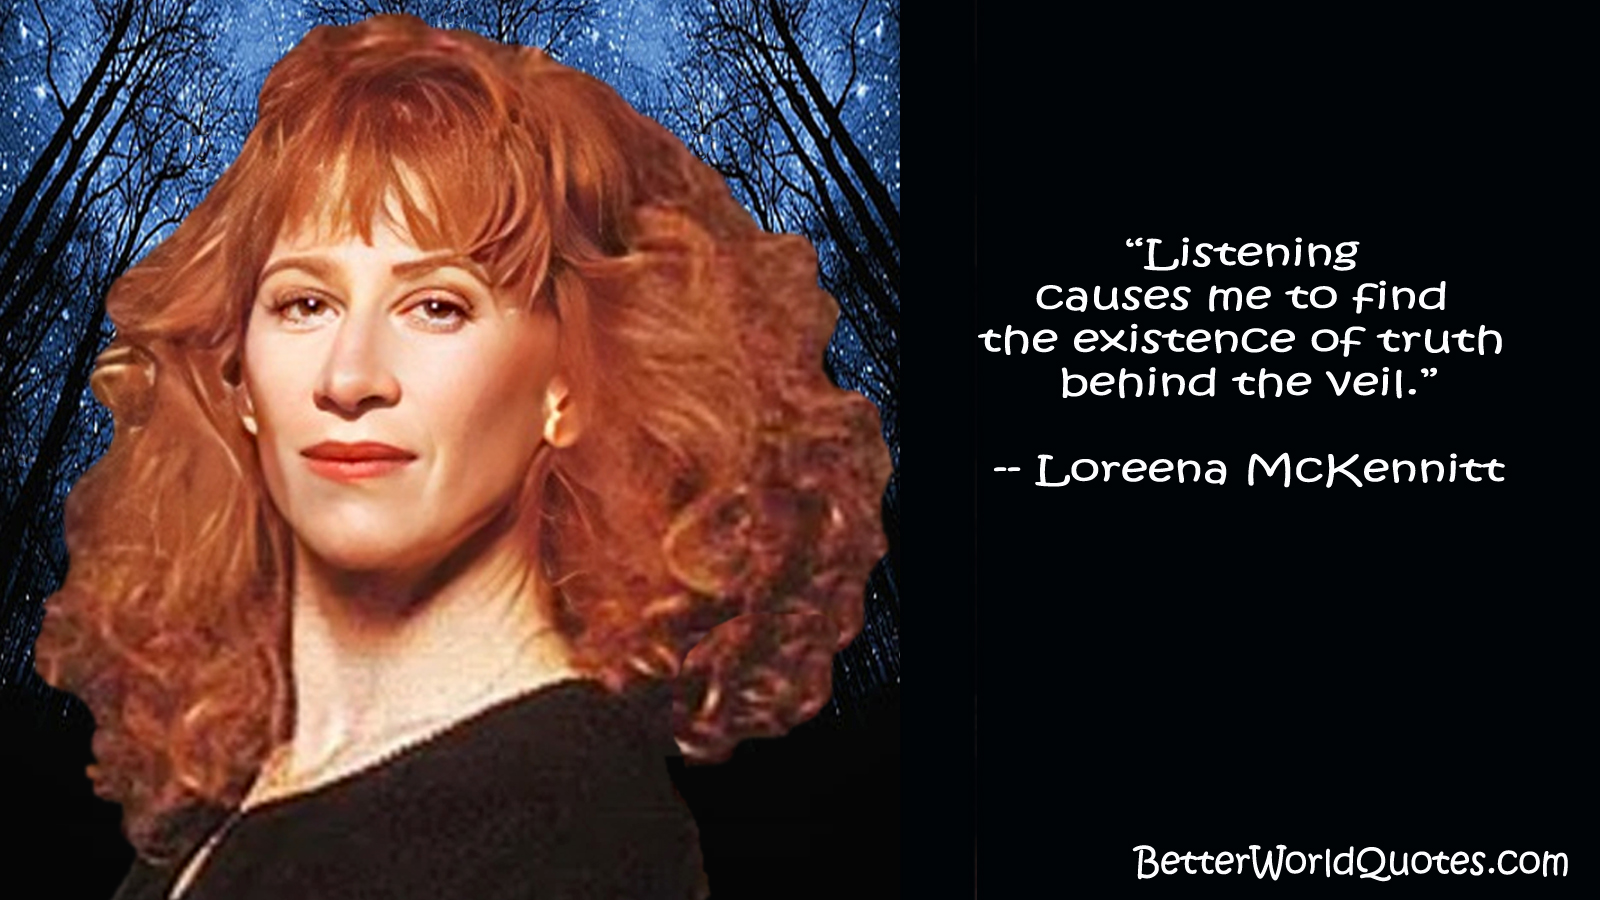 Loreena McKennitt: Listening causes me to find the existence of truth behind the veil.